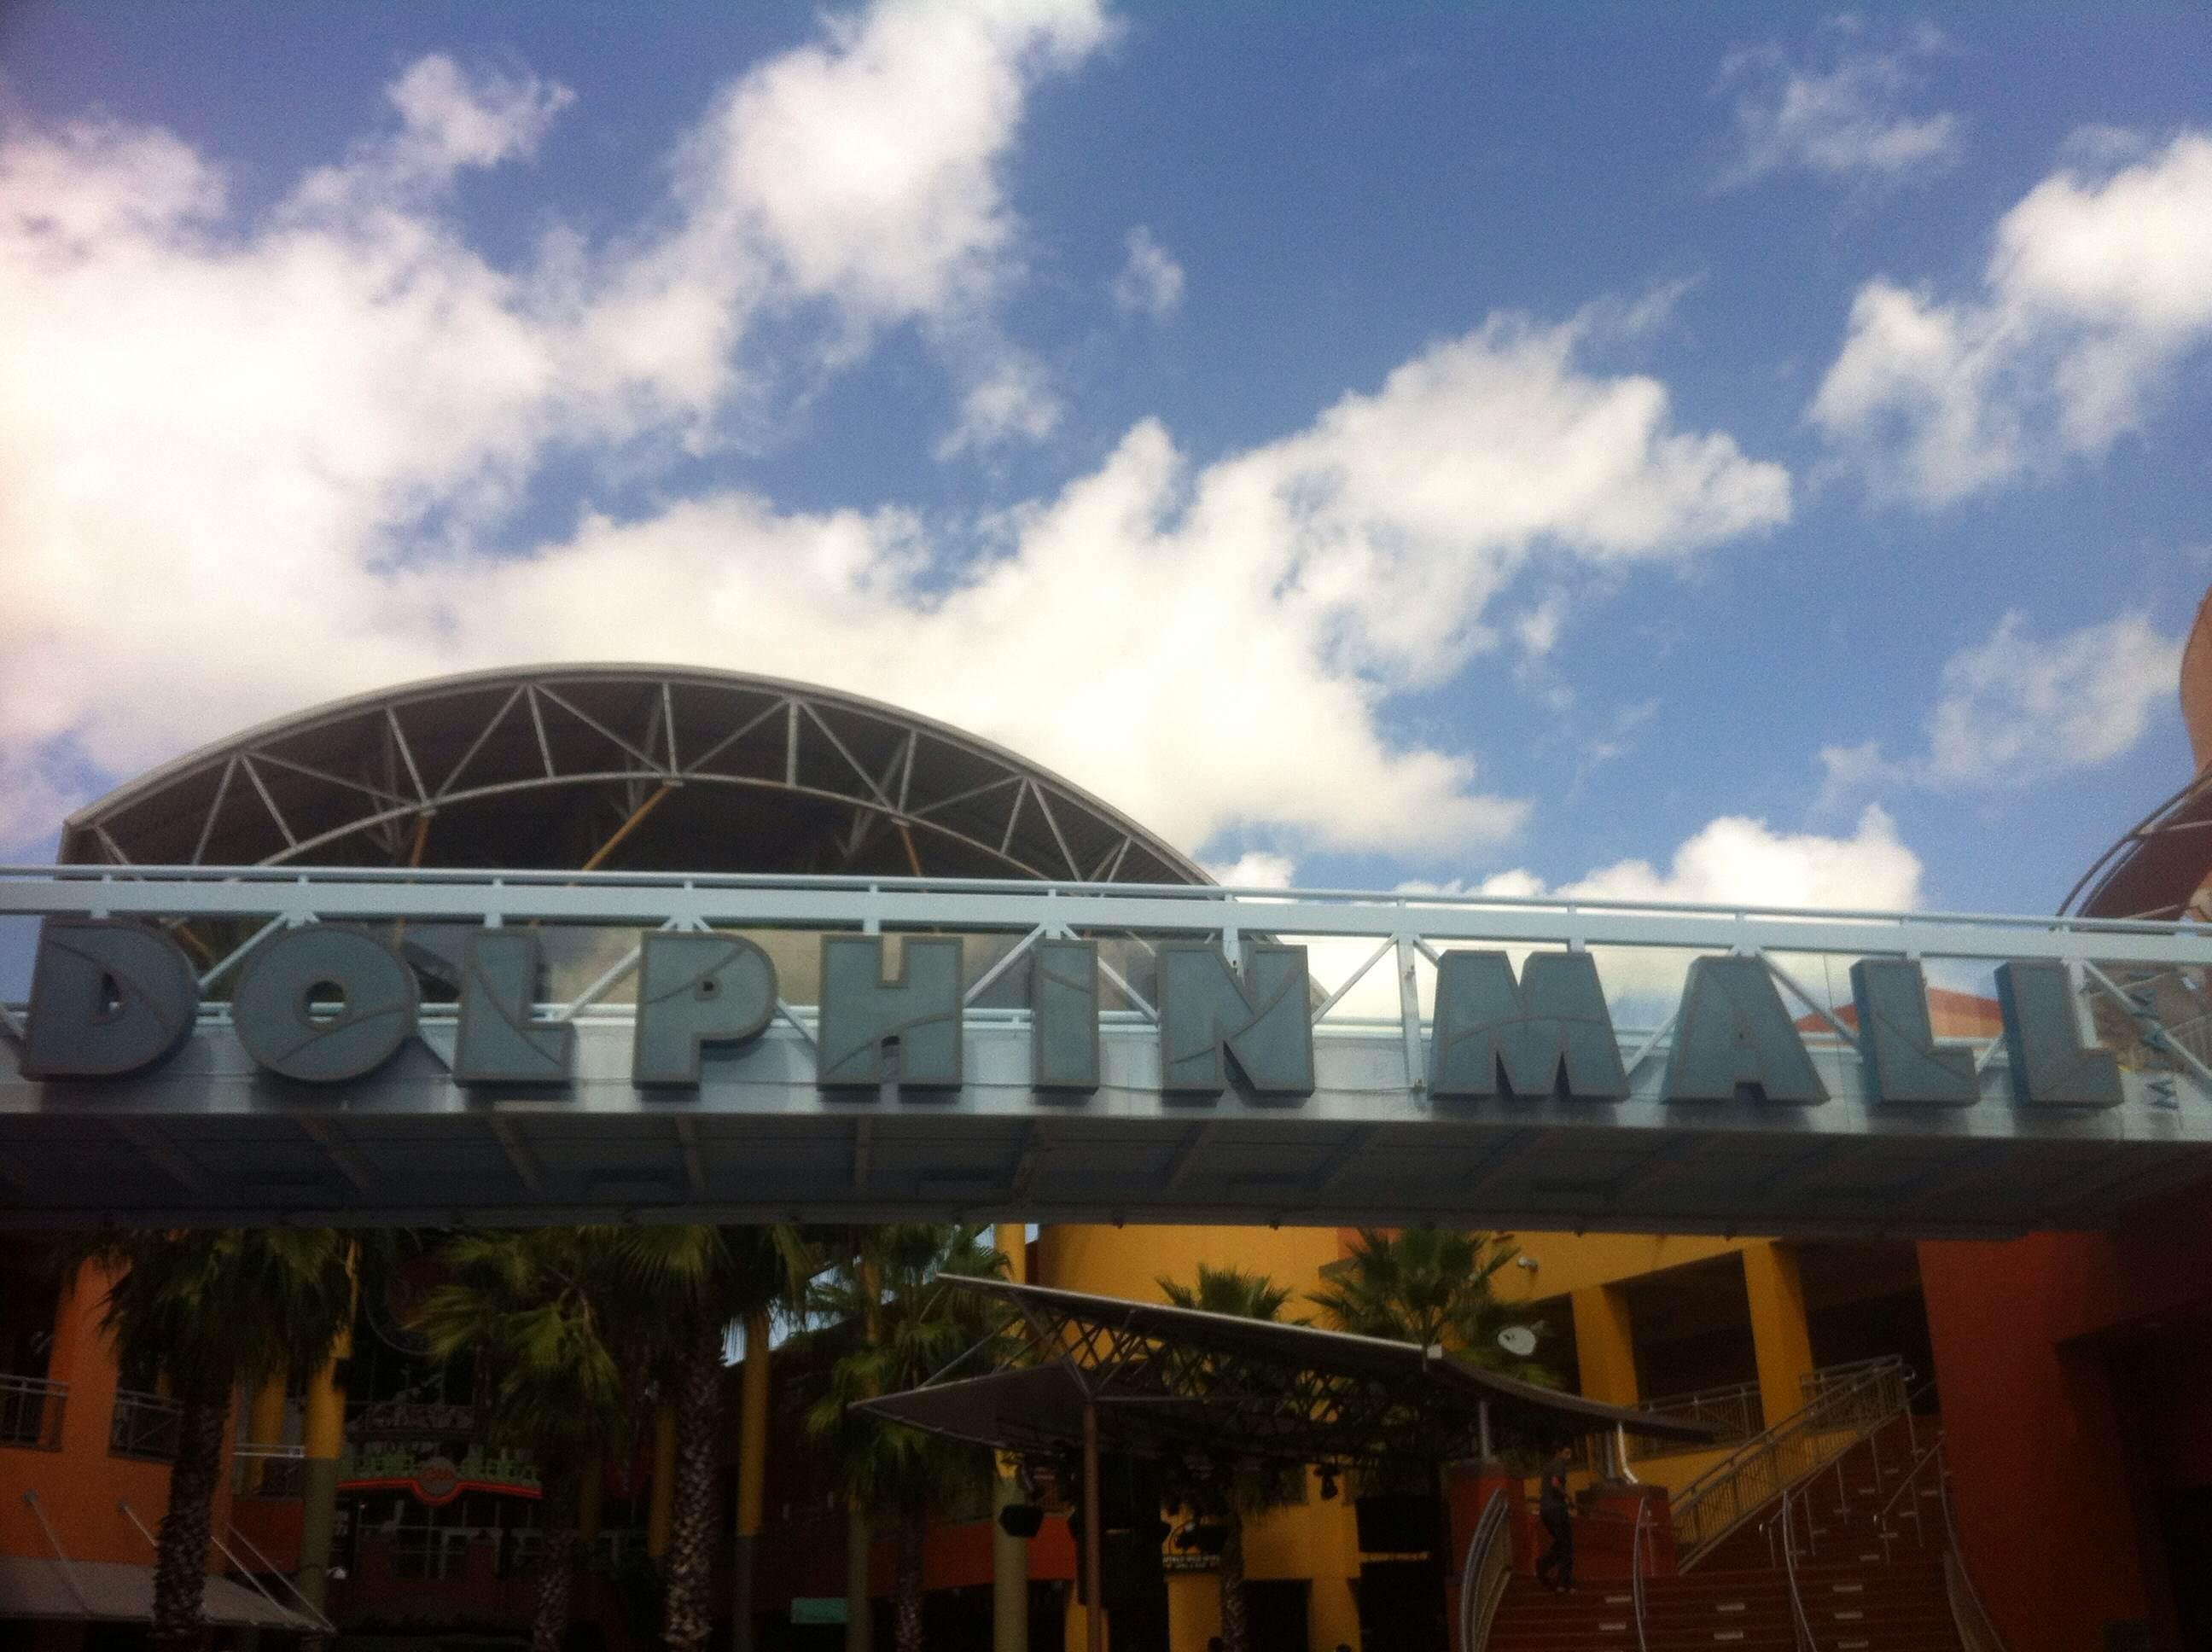 Dolphin Mall in Miami - The Largest Outlet Mall in South Florida